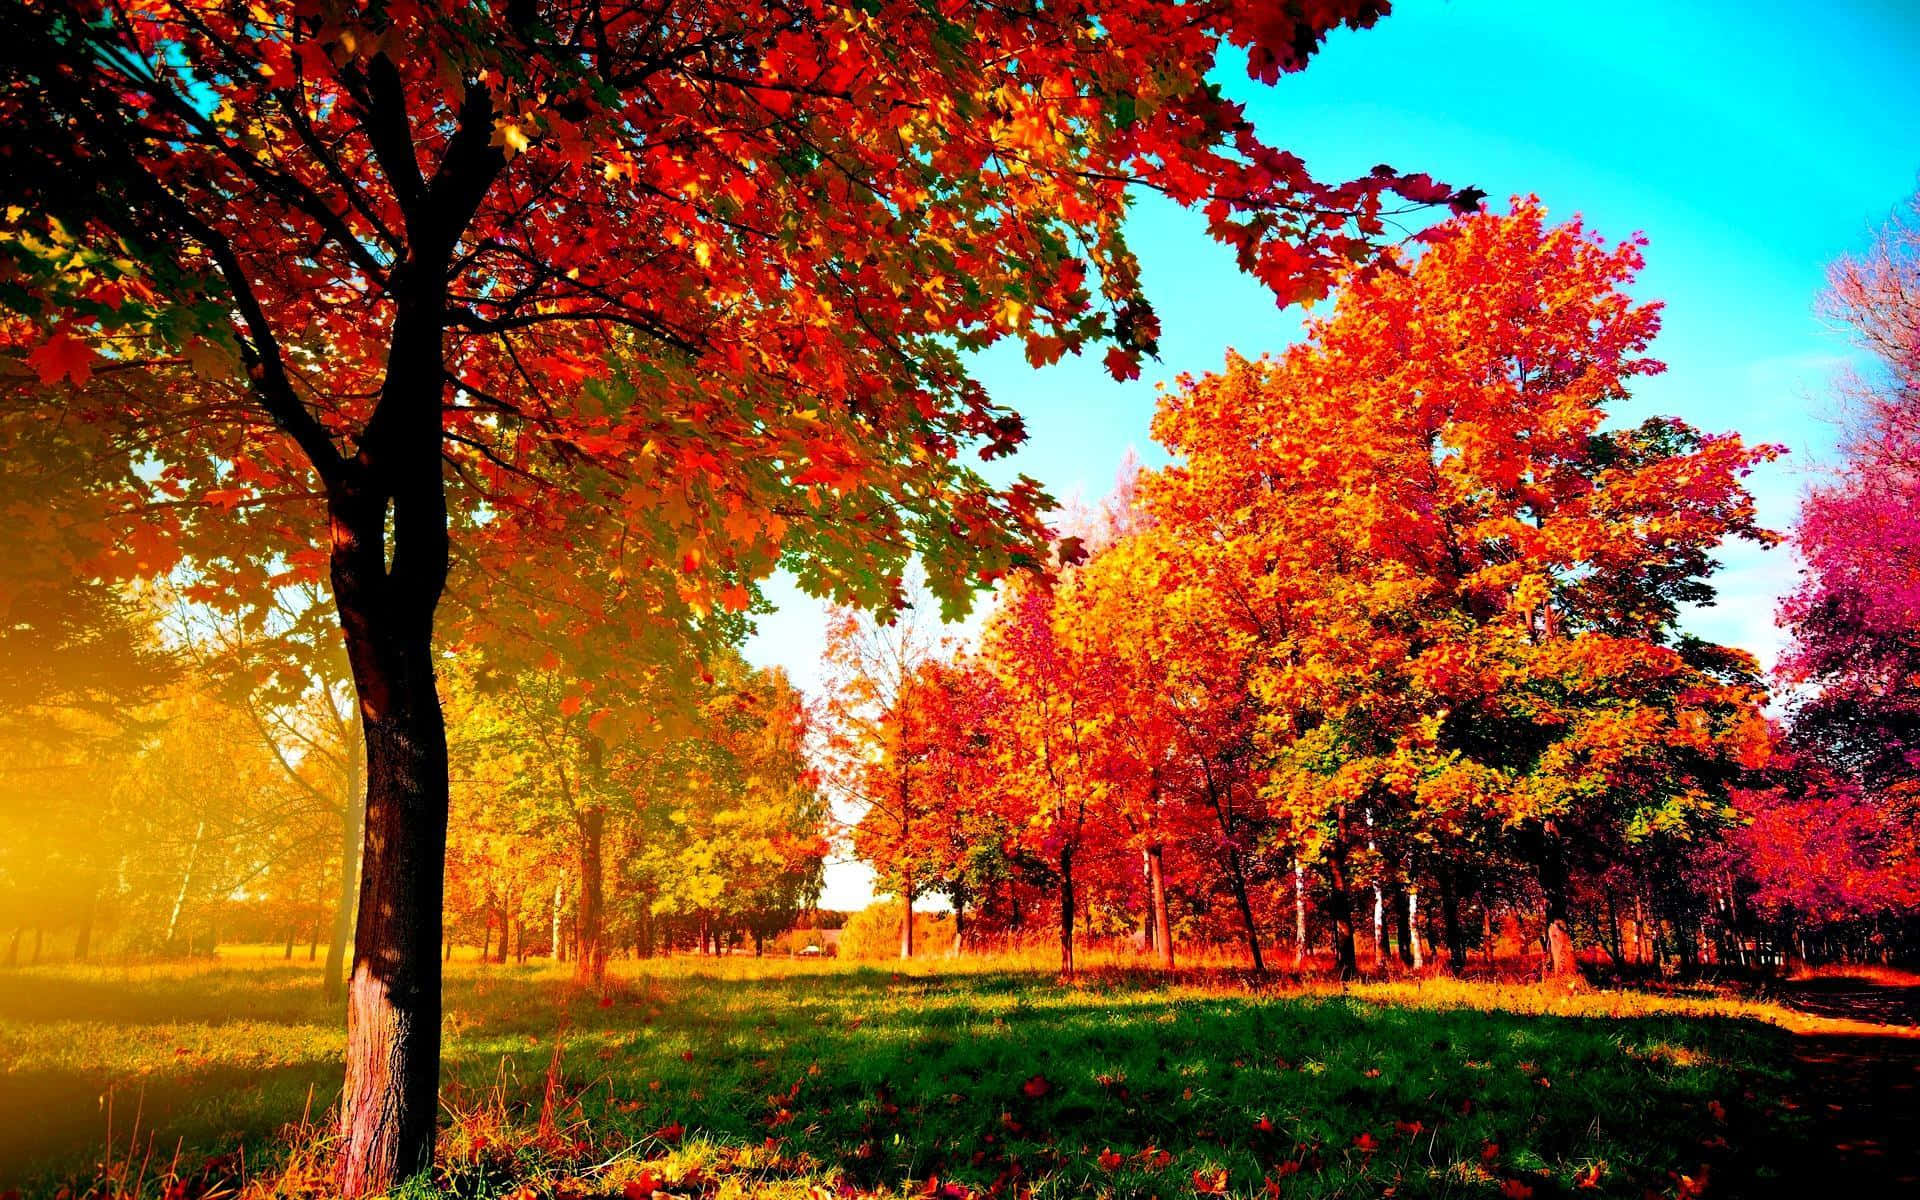 Caption: Stunning Fall Foliage in the Forest Wallpaper